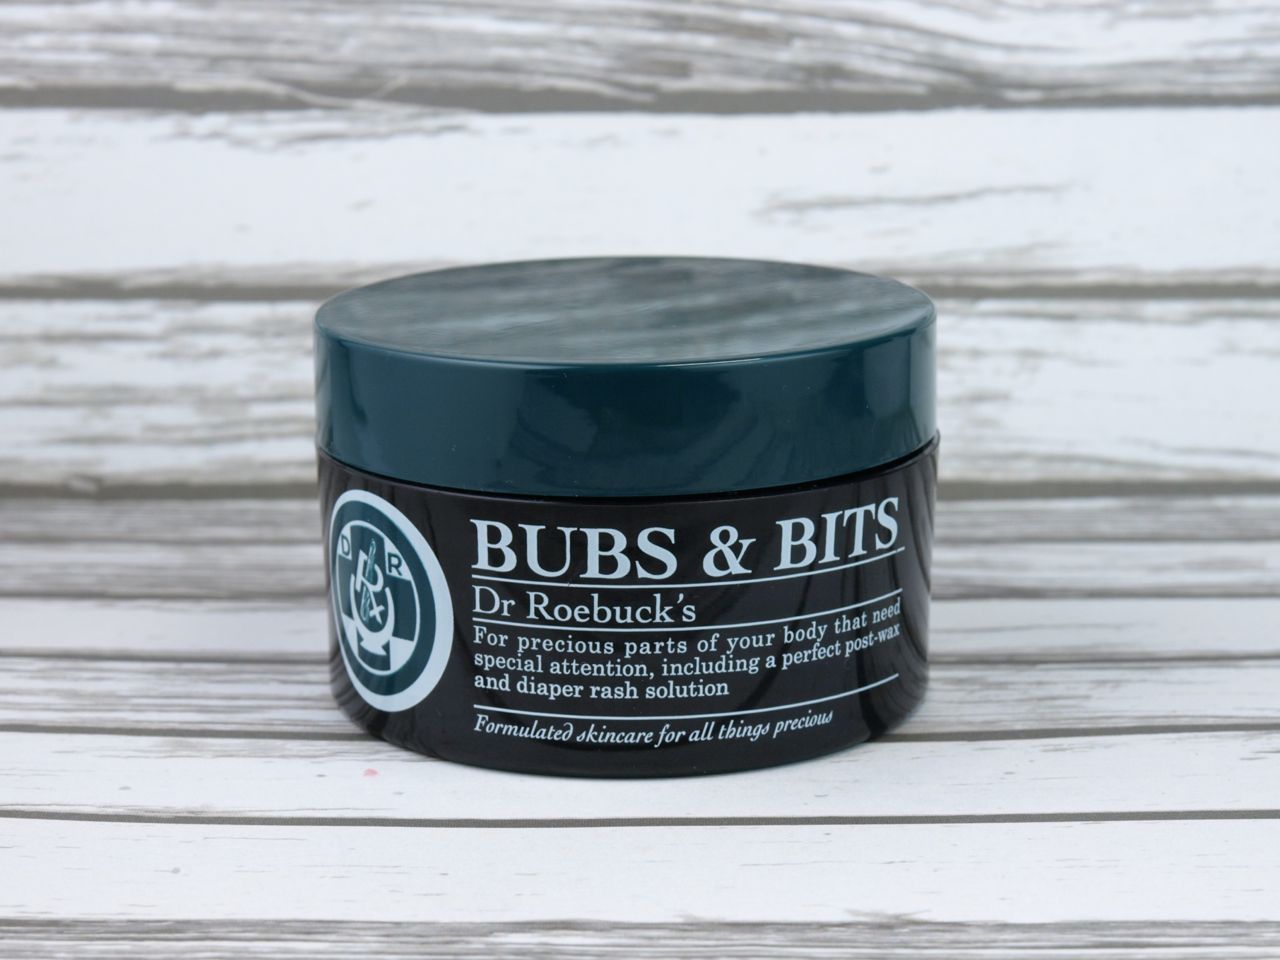 Dr Roebuck's Bubs & Bits: Review